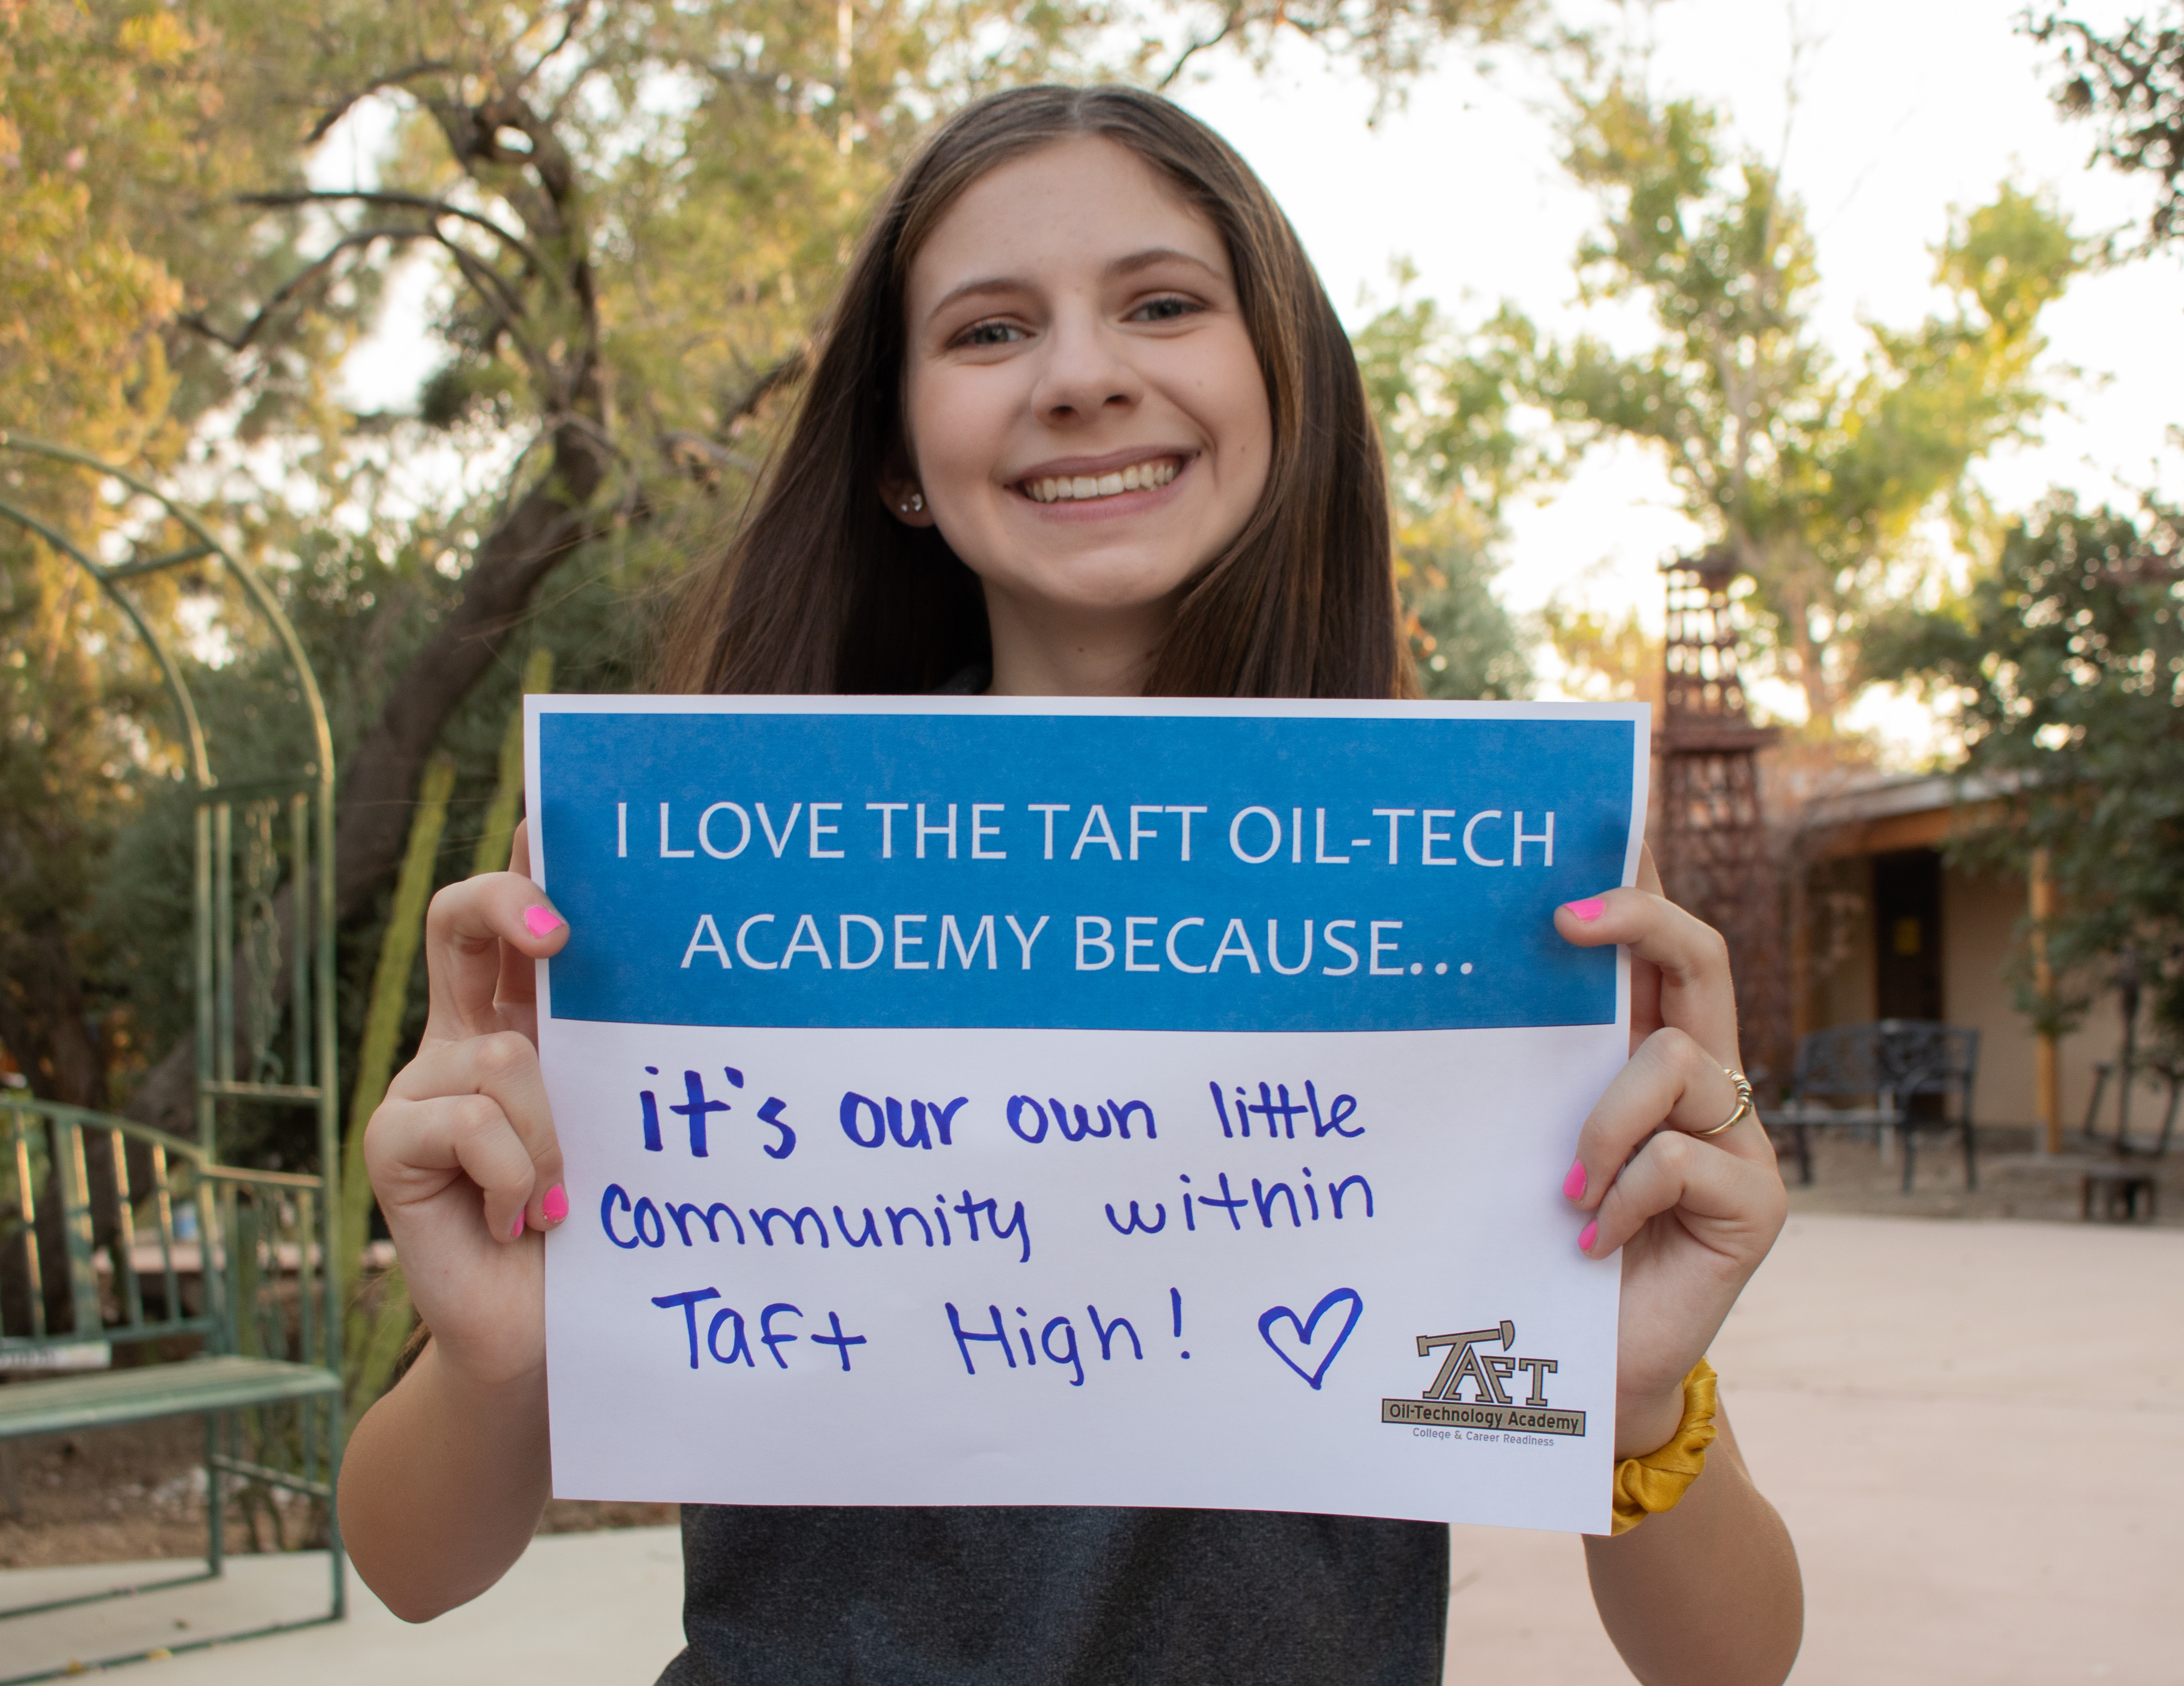 Student Christina - "I love Taft Oil-Tech Academy because...it's our own little community within Taft High"